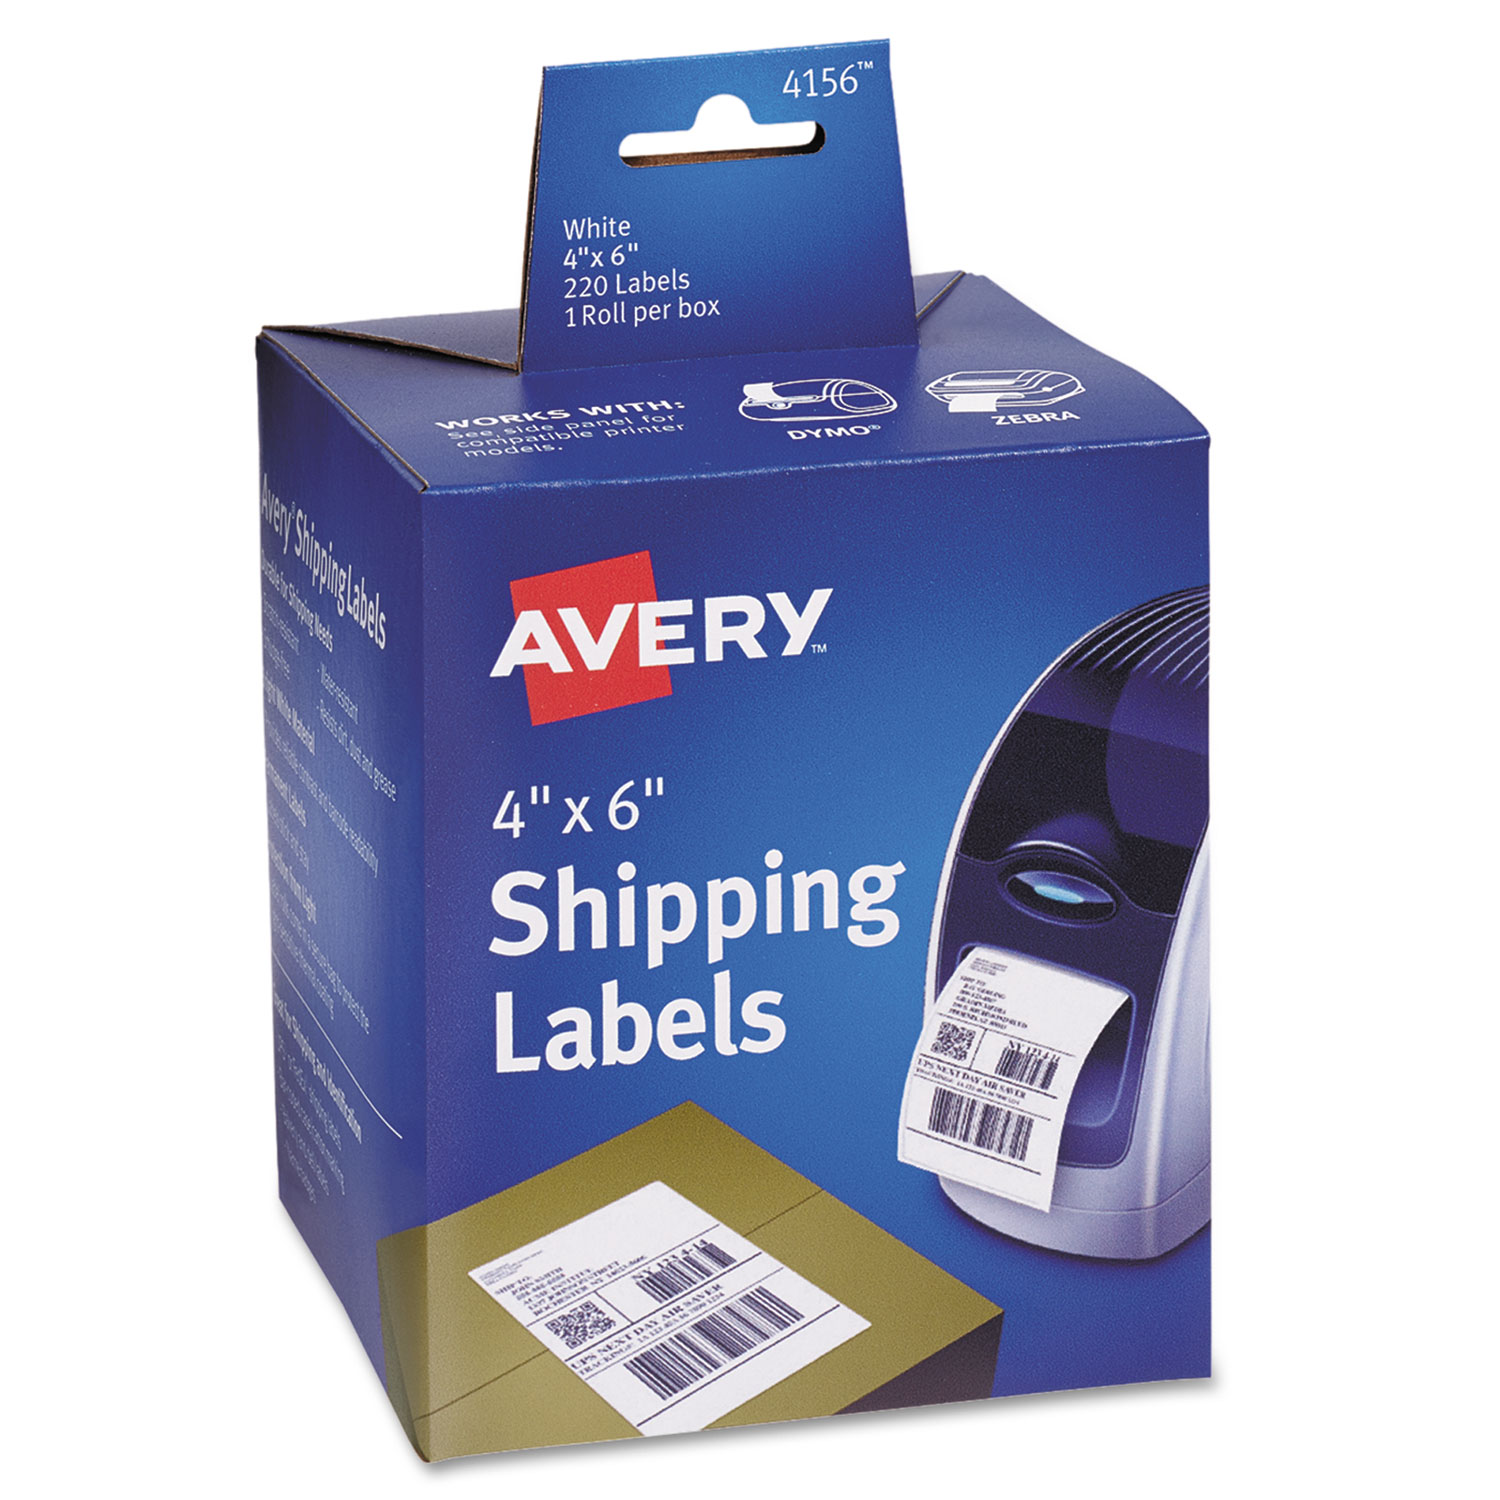  Avery 04156 Thermal Printer Labels, Thermal Printers, 4 x 6, White, 220/Roll (AVE4156) 